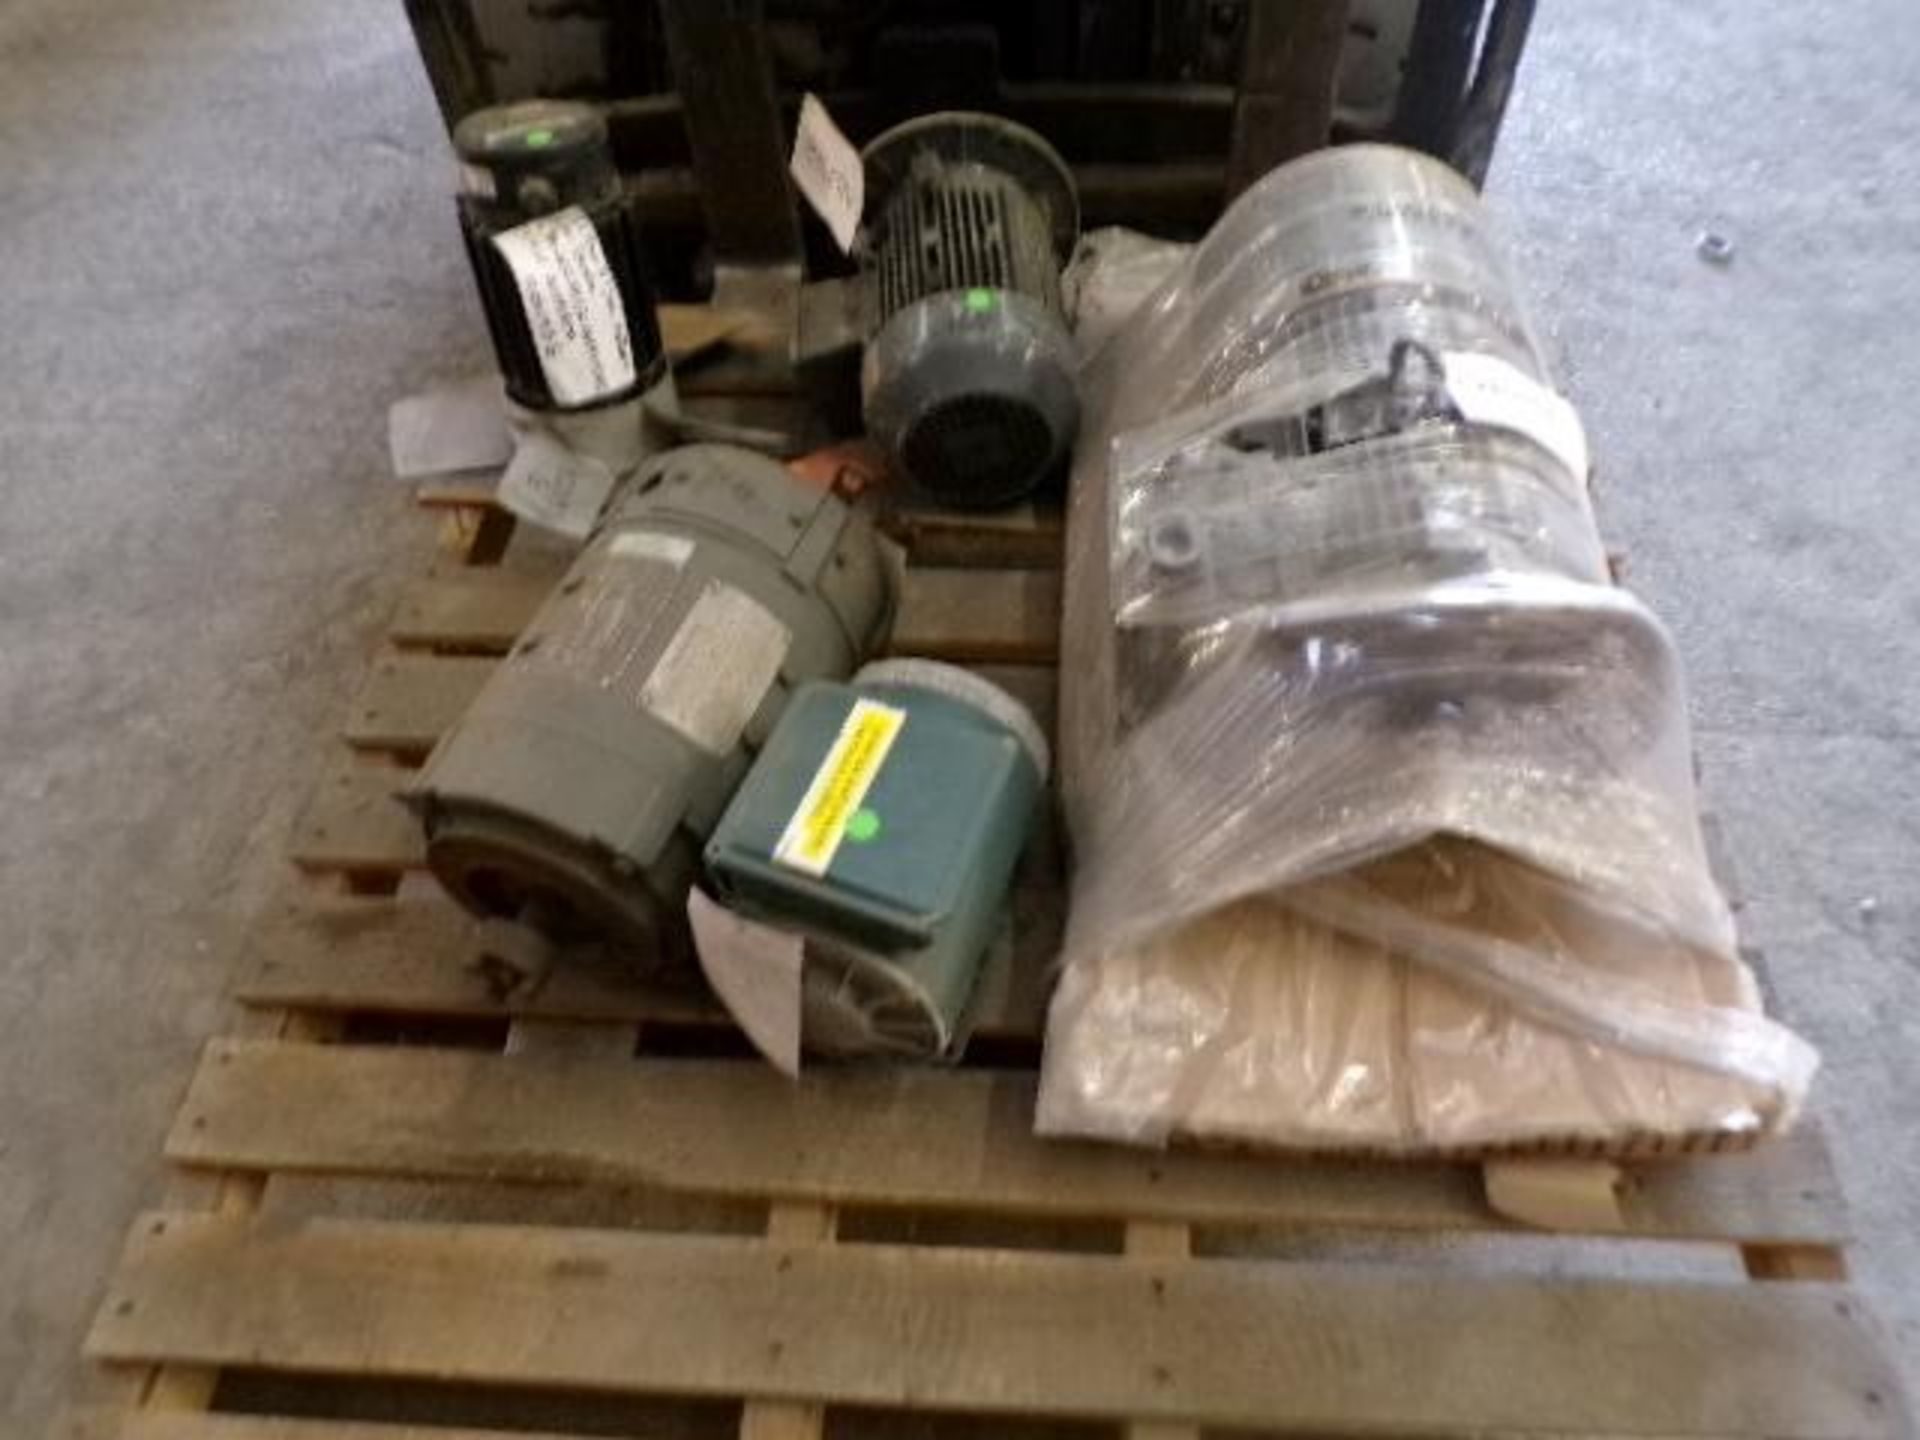 Assortment of Electric Motors, 1HP, 1750 RPM, 7.5HP, 1770 RPM (New & Used) - Image 2 of 3